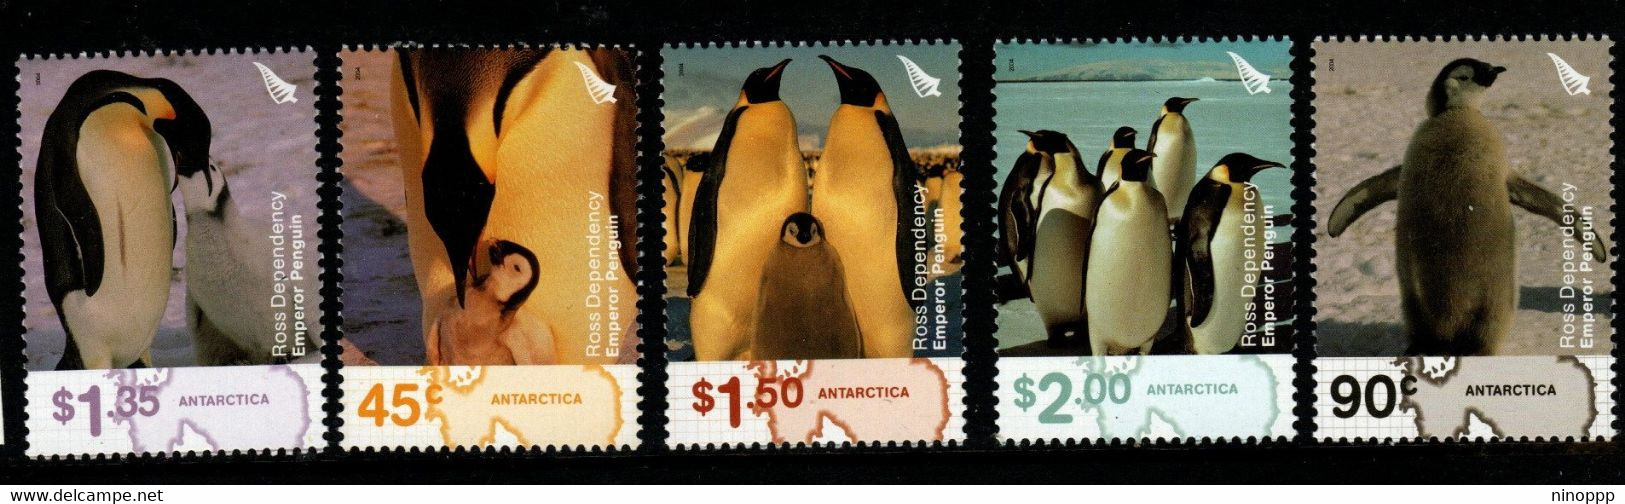 Ross Dependency SG 89-93 200 Emperor Penguins,minr Never Hinged - Unused Stamps